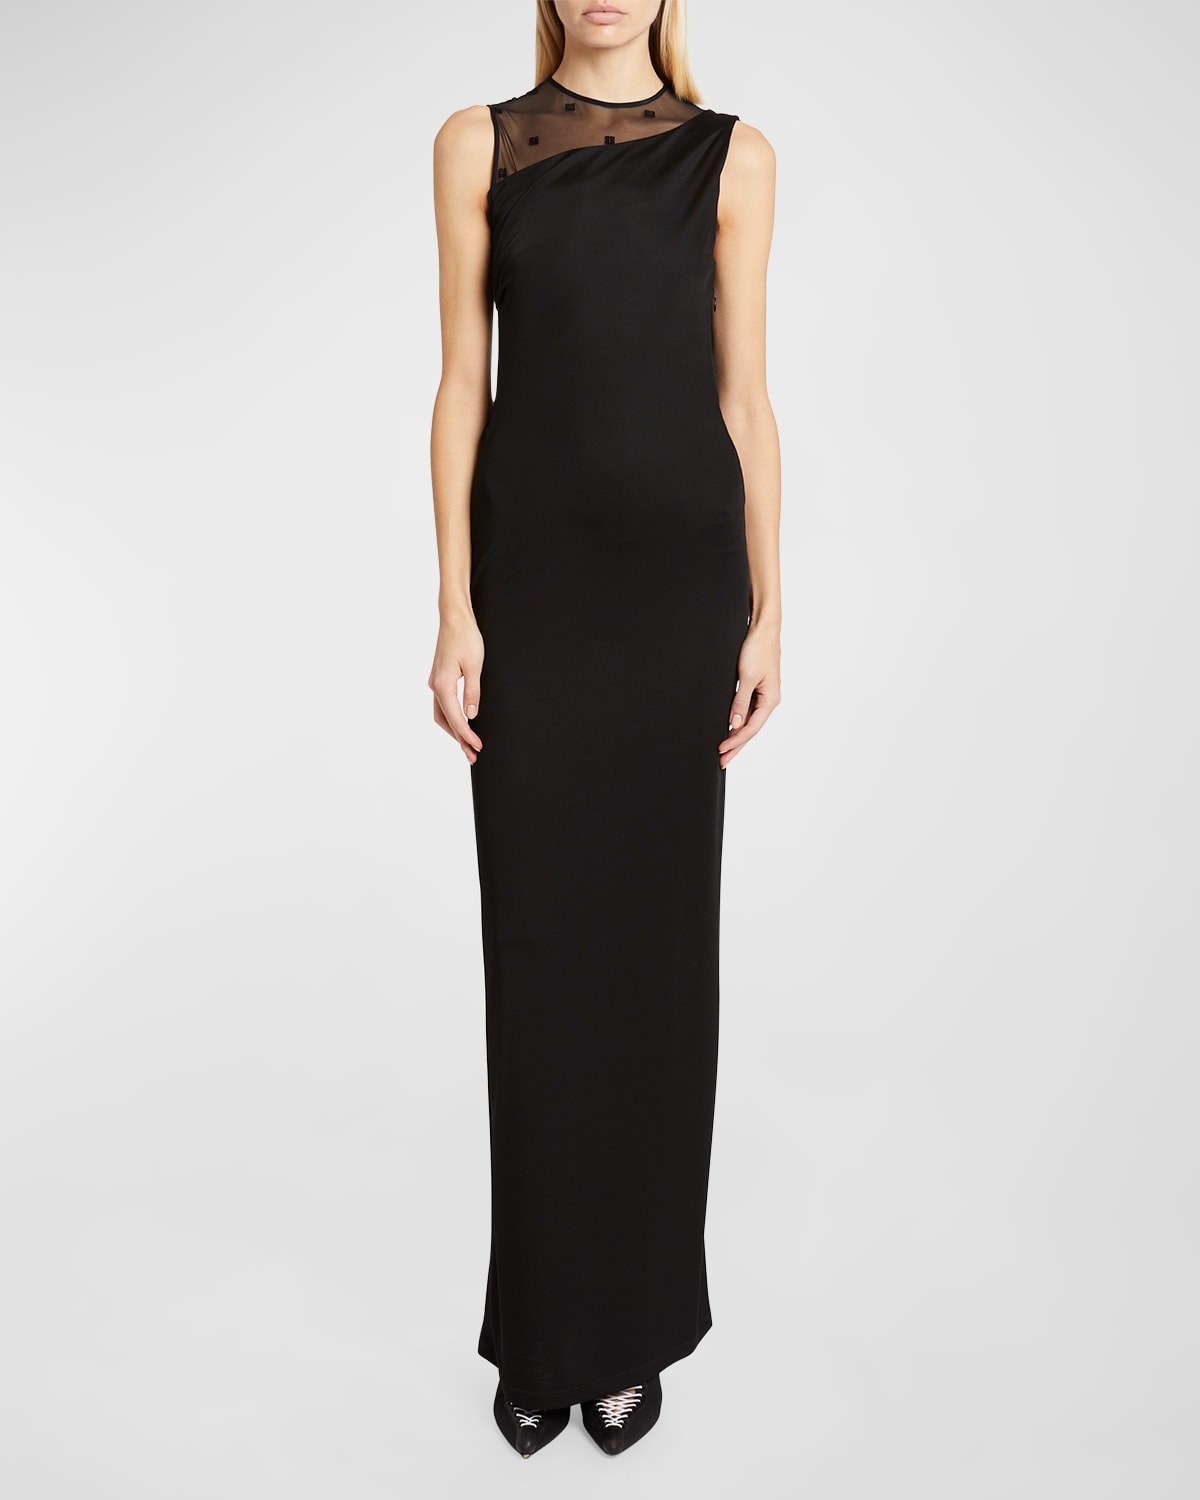 GIVENCHY SATIN COLUMN GOWN WITH TULLE INSET DETAIL